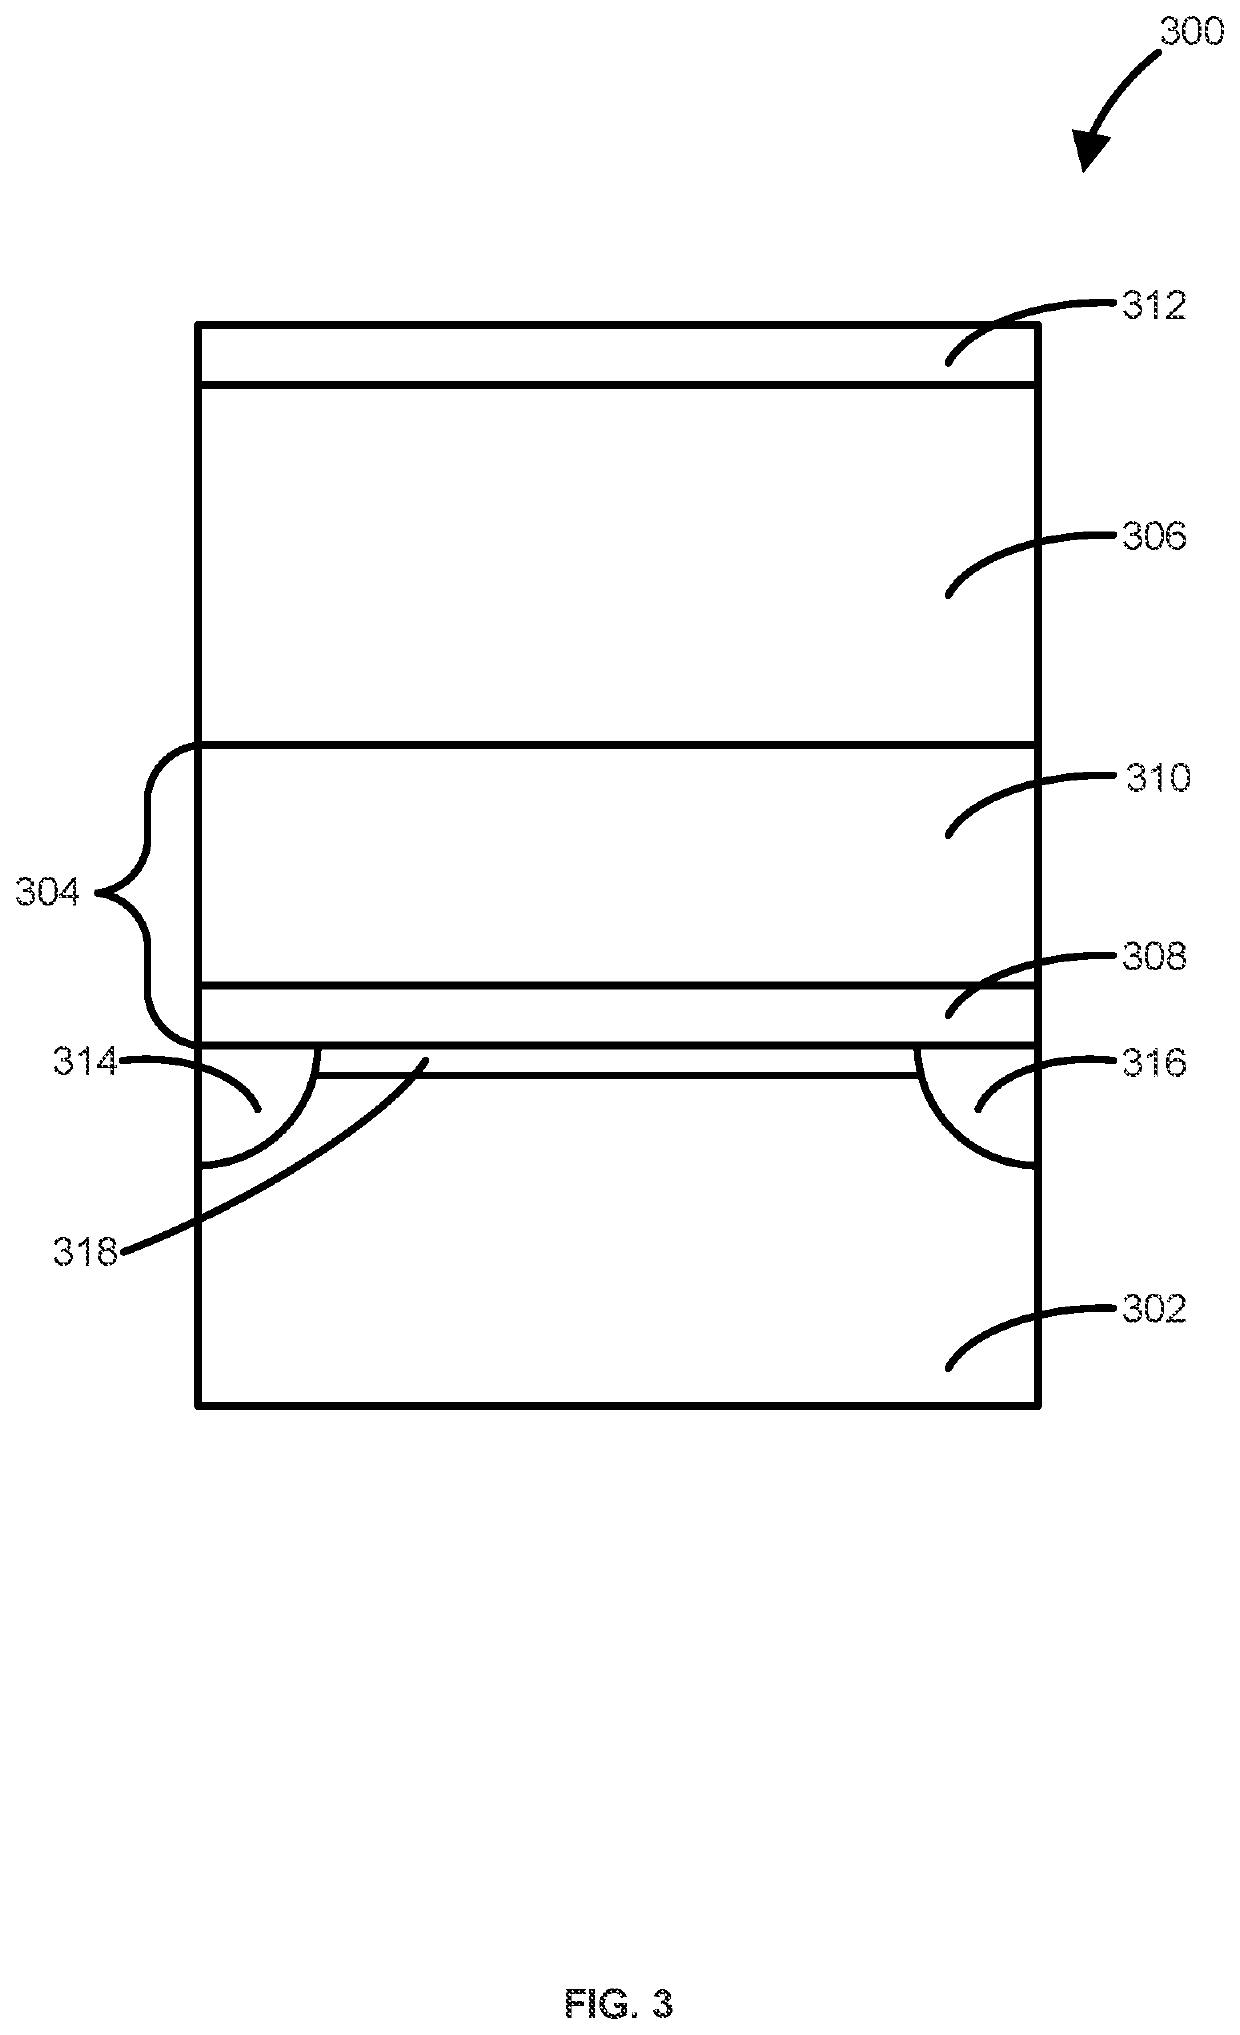 Method of forming structures including a vanadium or indium layer